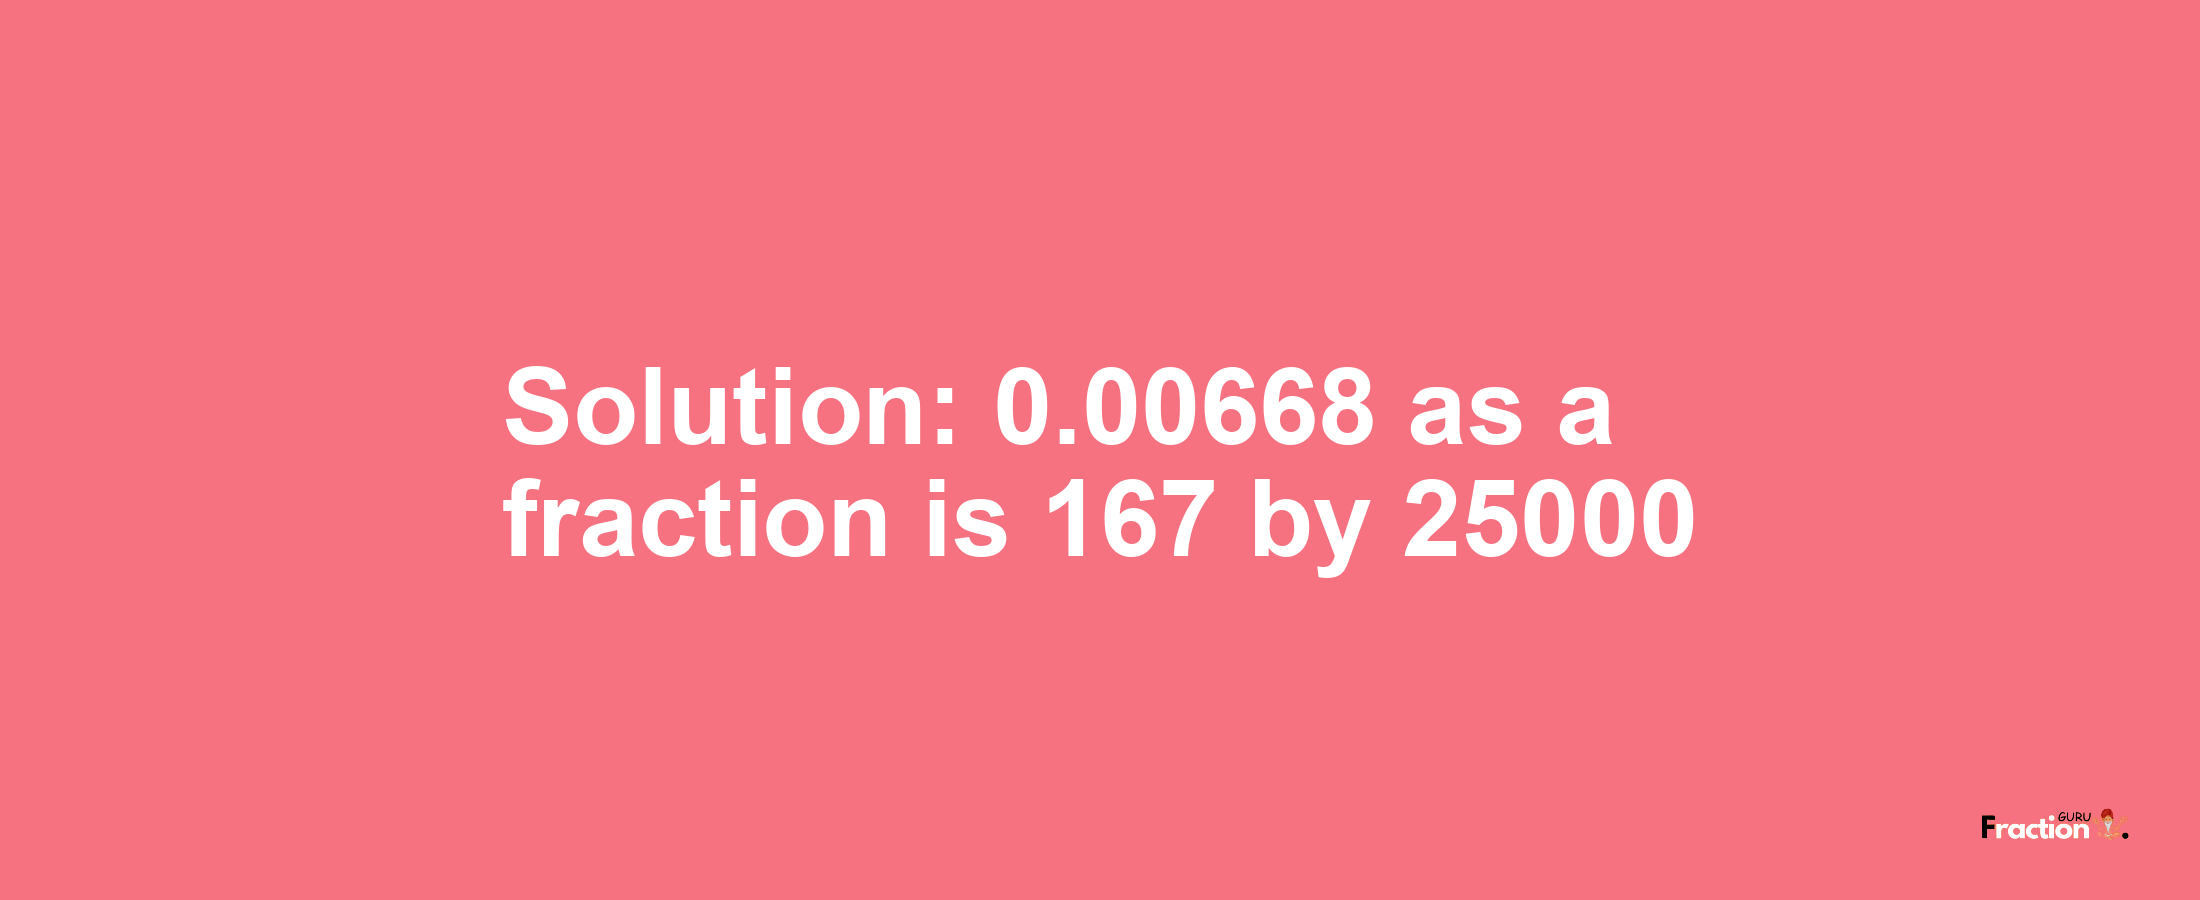 Solution:0.00668 as a fraction is 167/25000